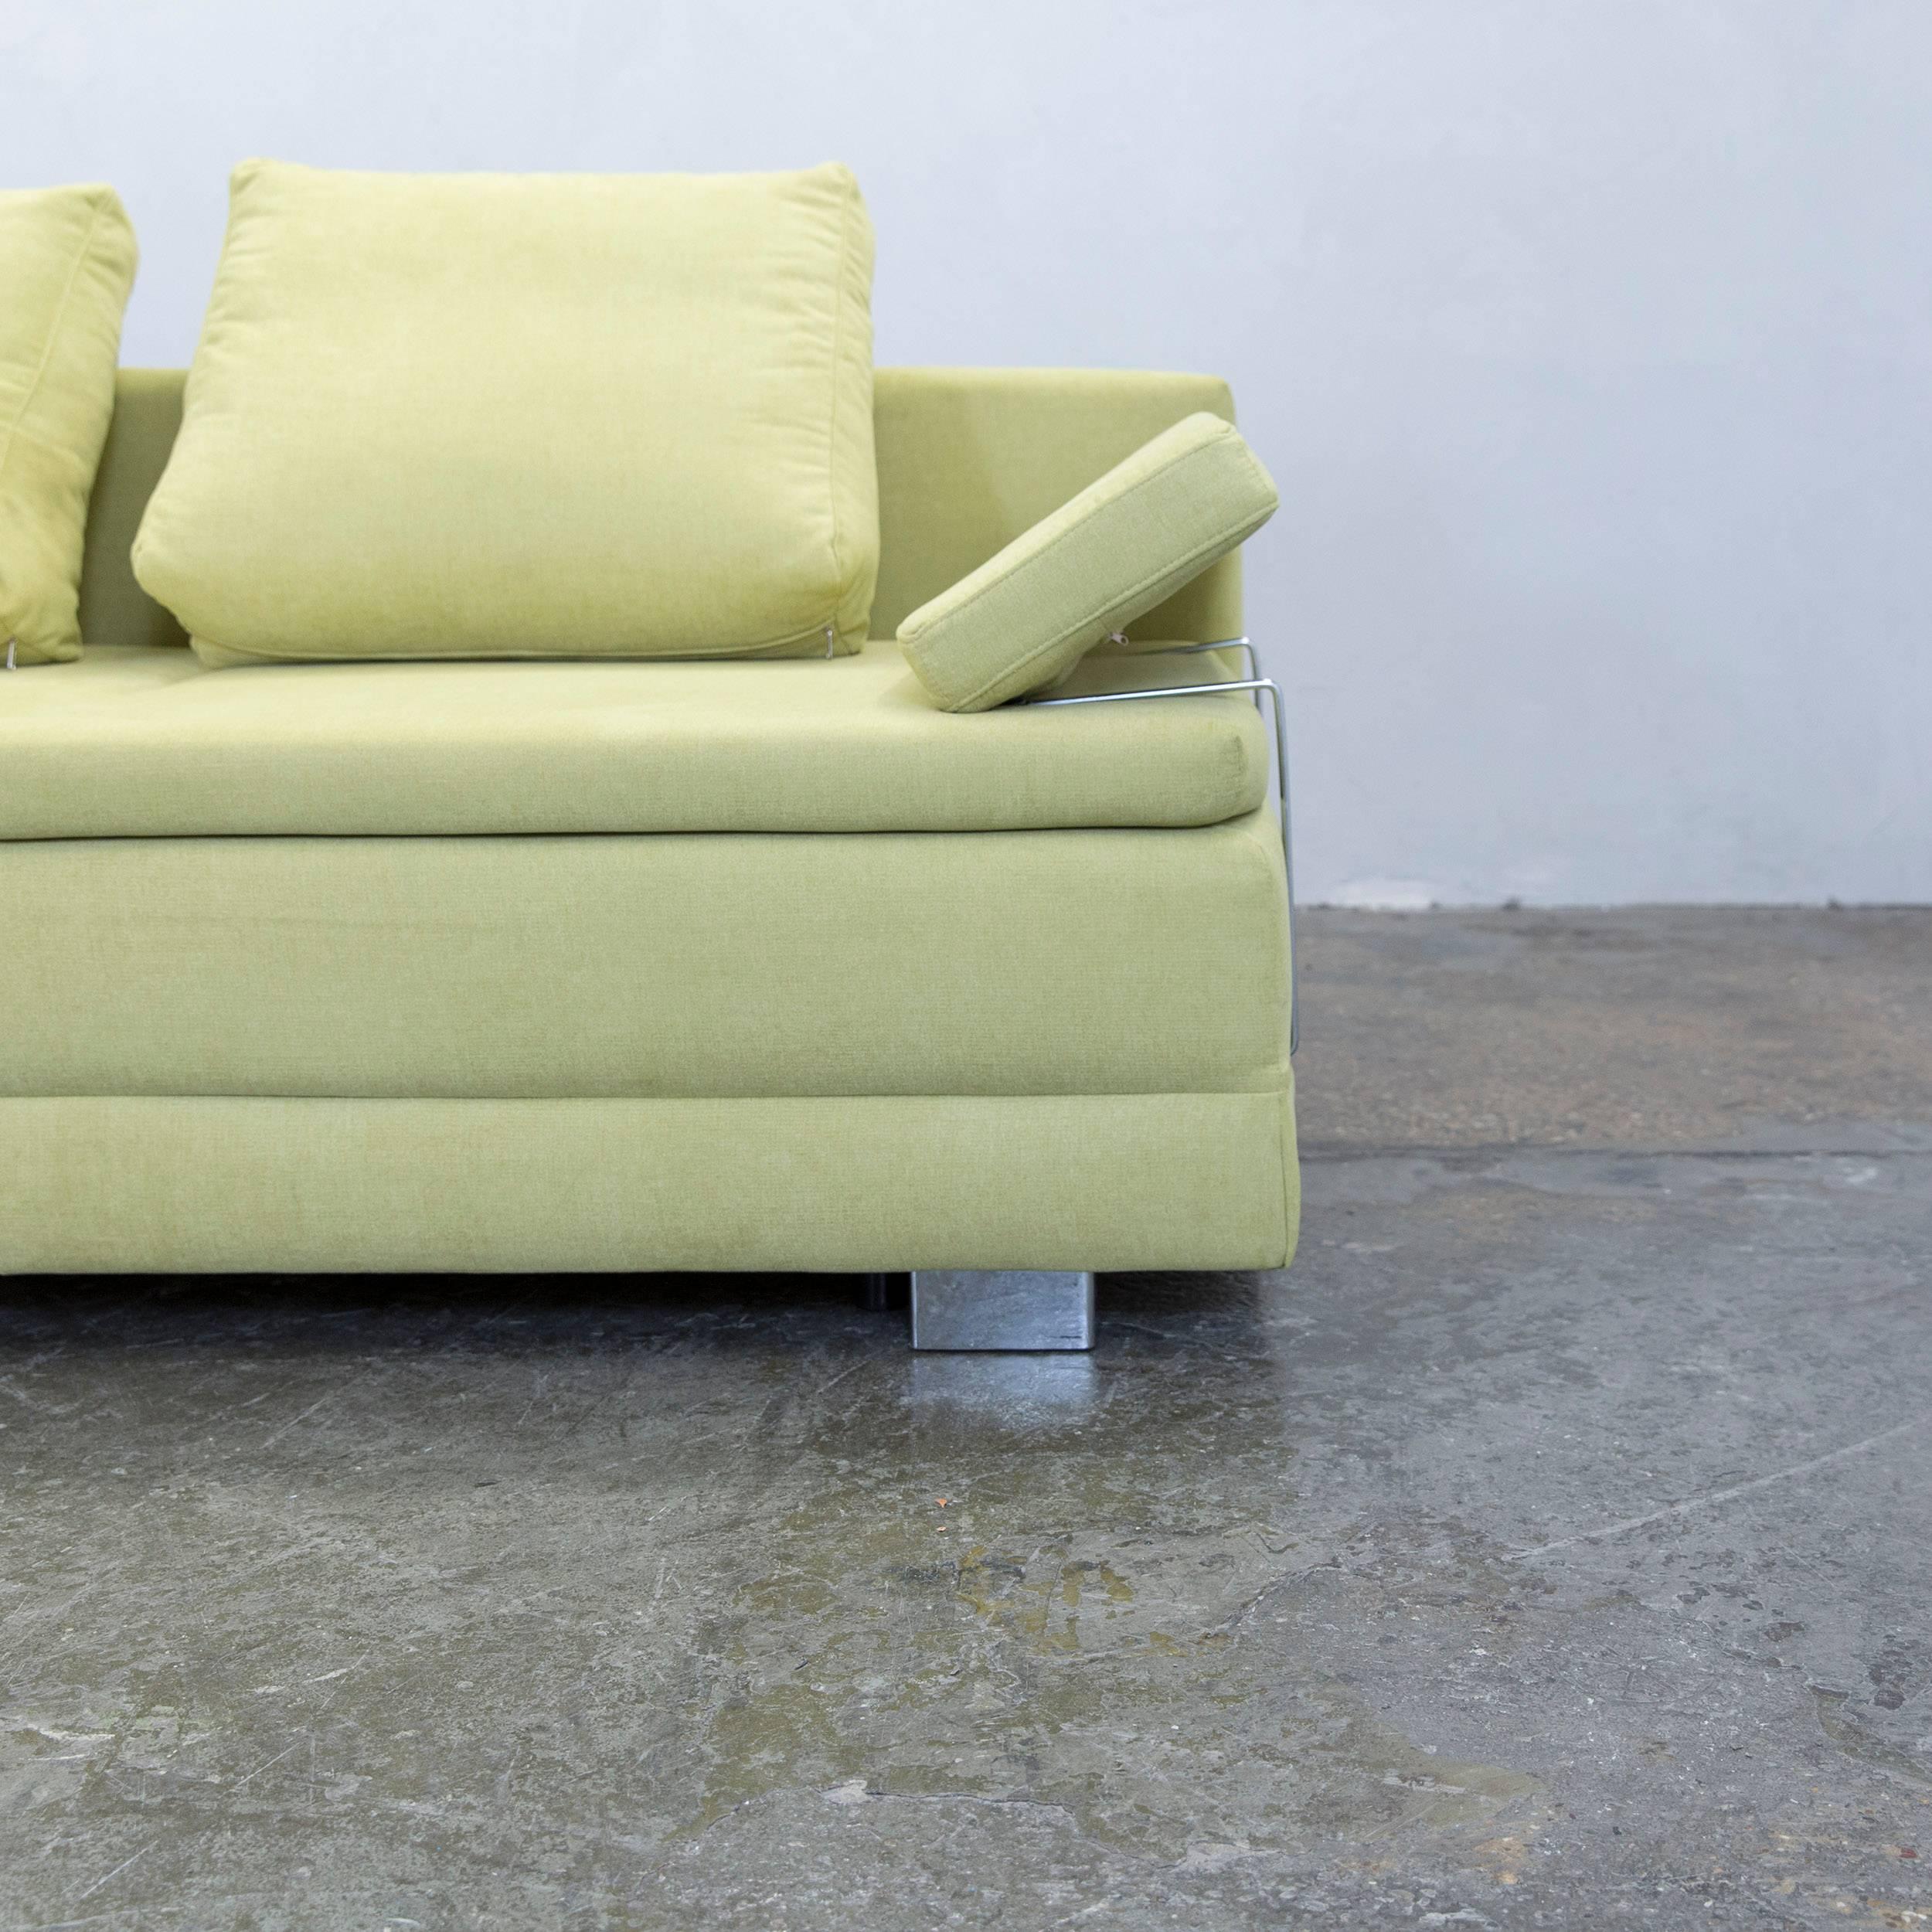 Green colored designer sleep sofa, in a minimalistic and modern design, with a convenient function, made for pure comfort and flexibility.